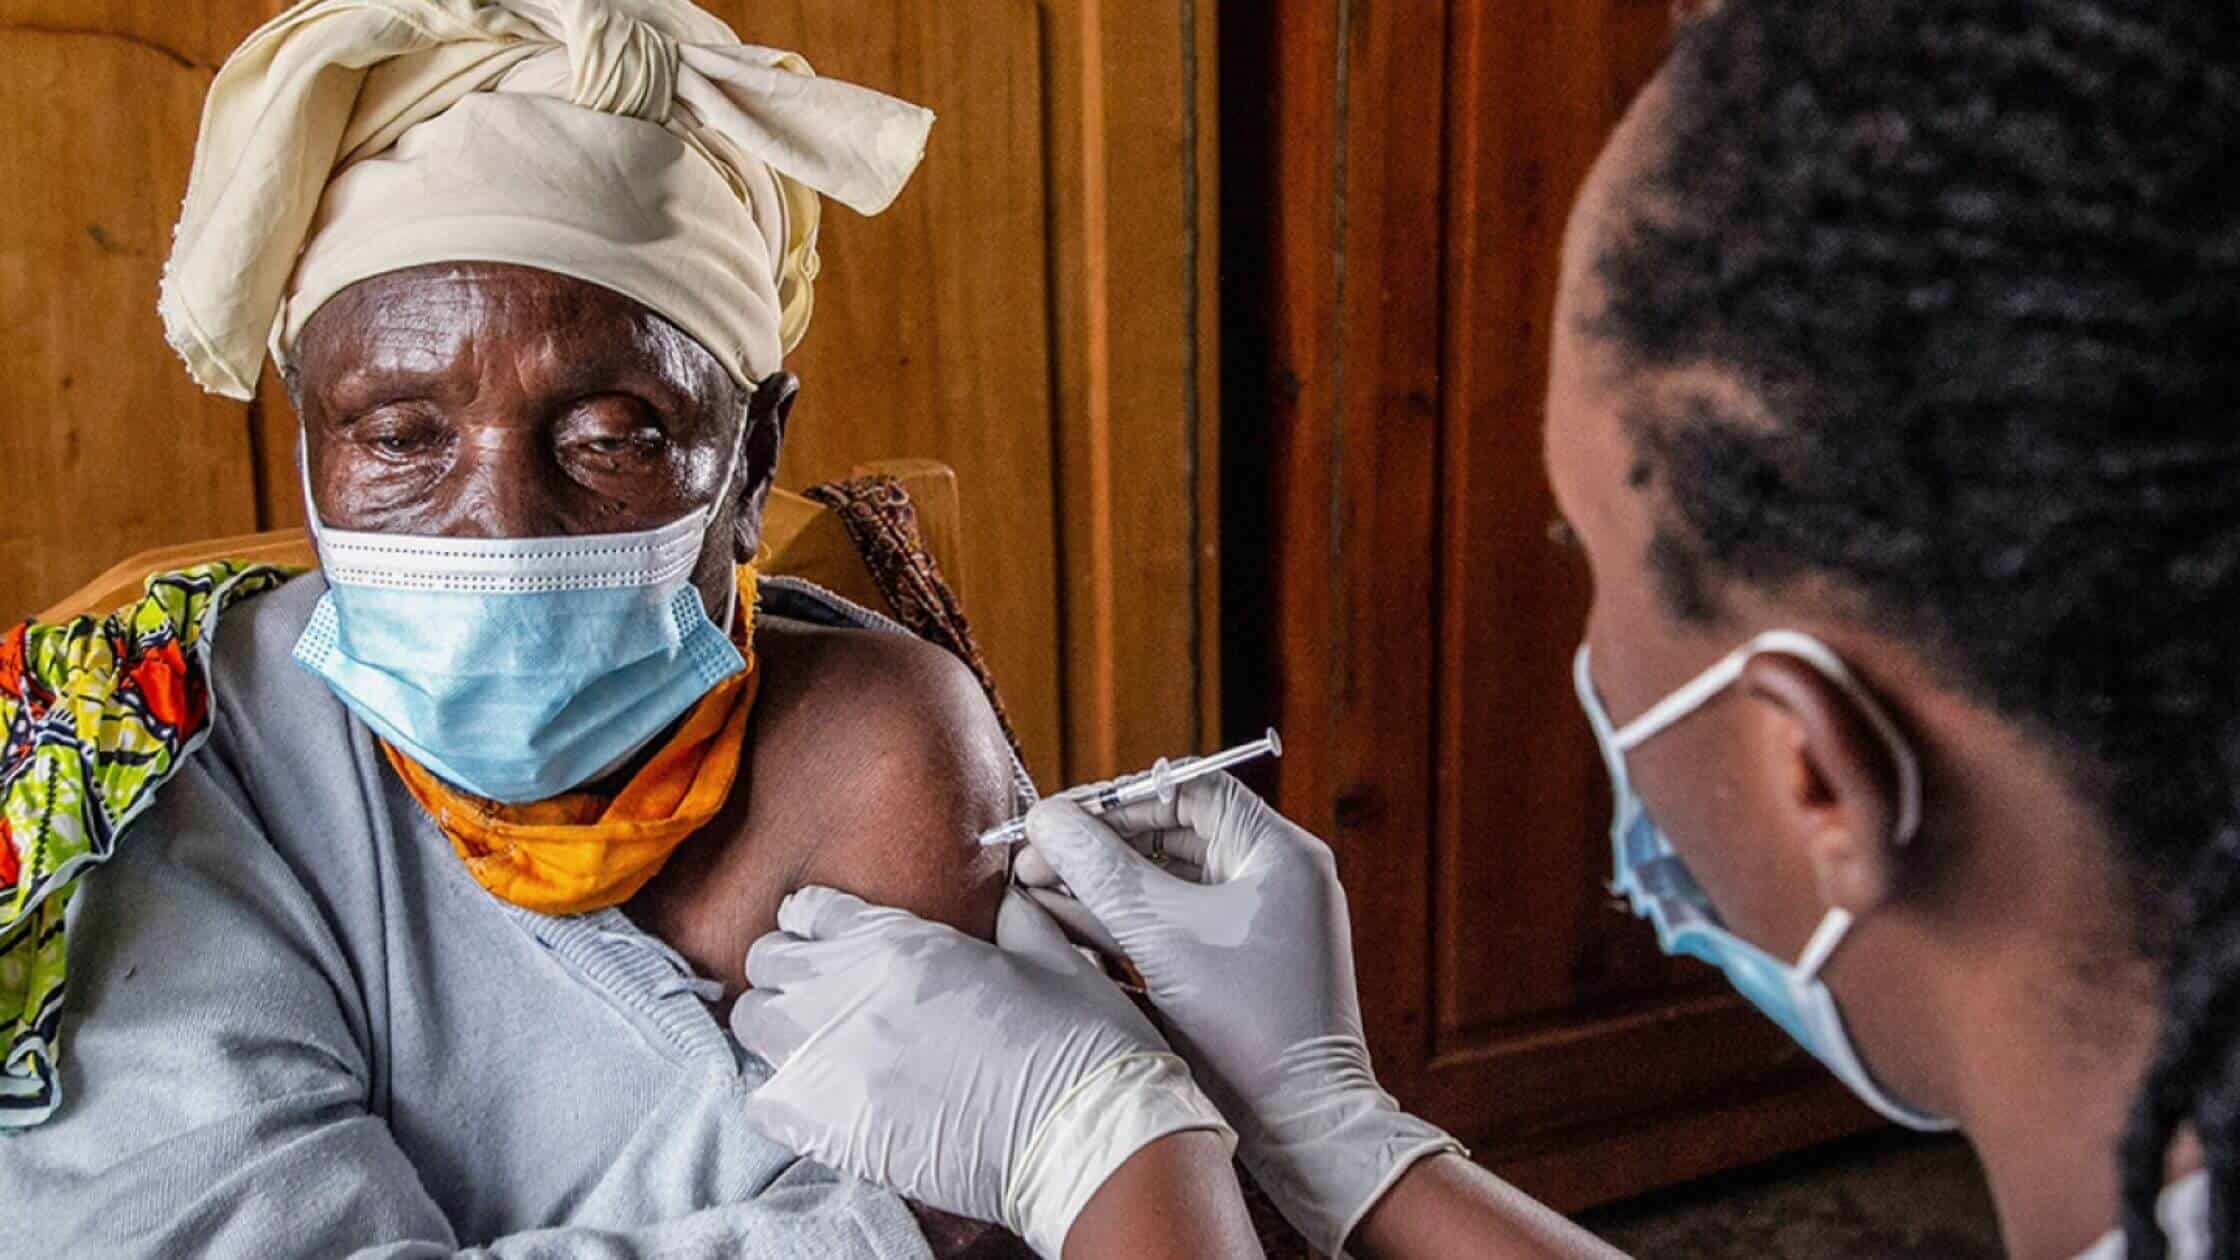 Continued Progress Has Been Made With The Malaria Vaccine